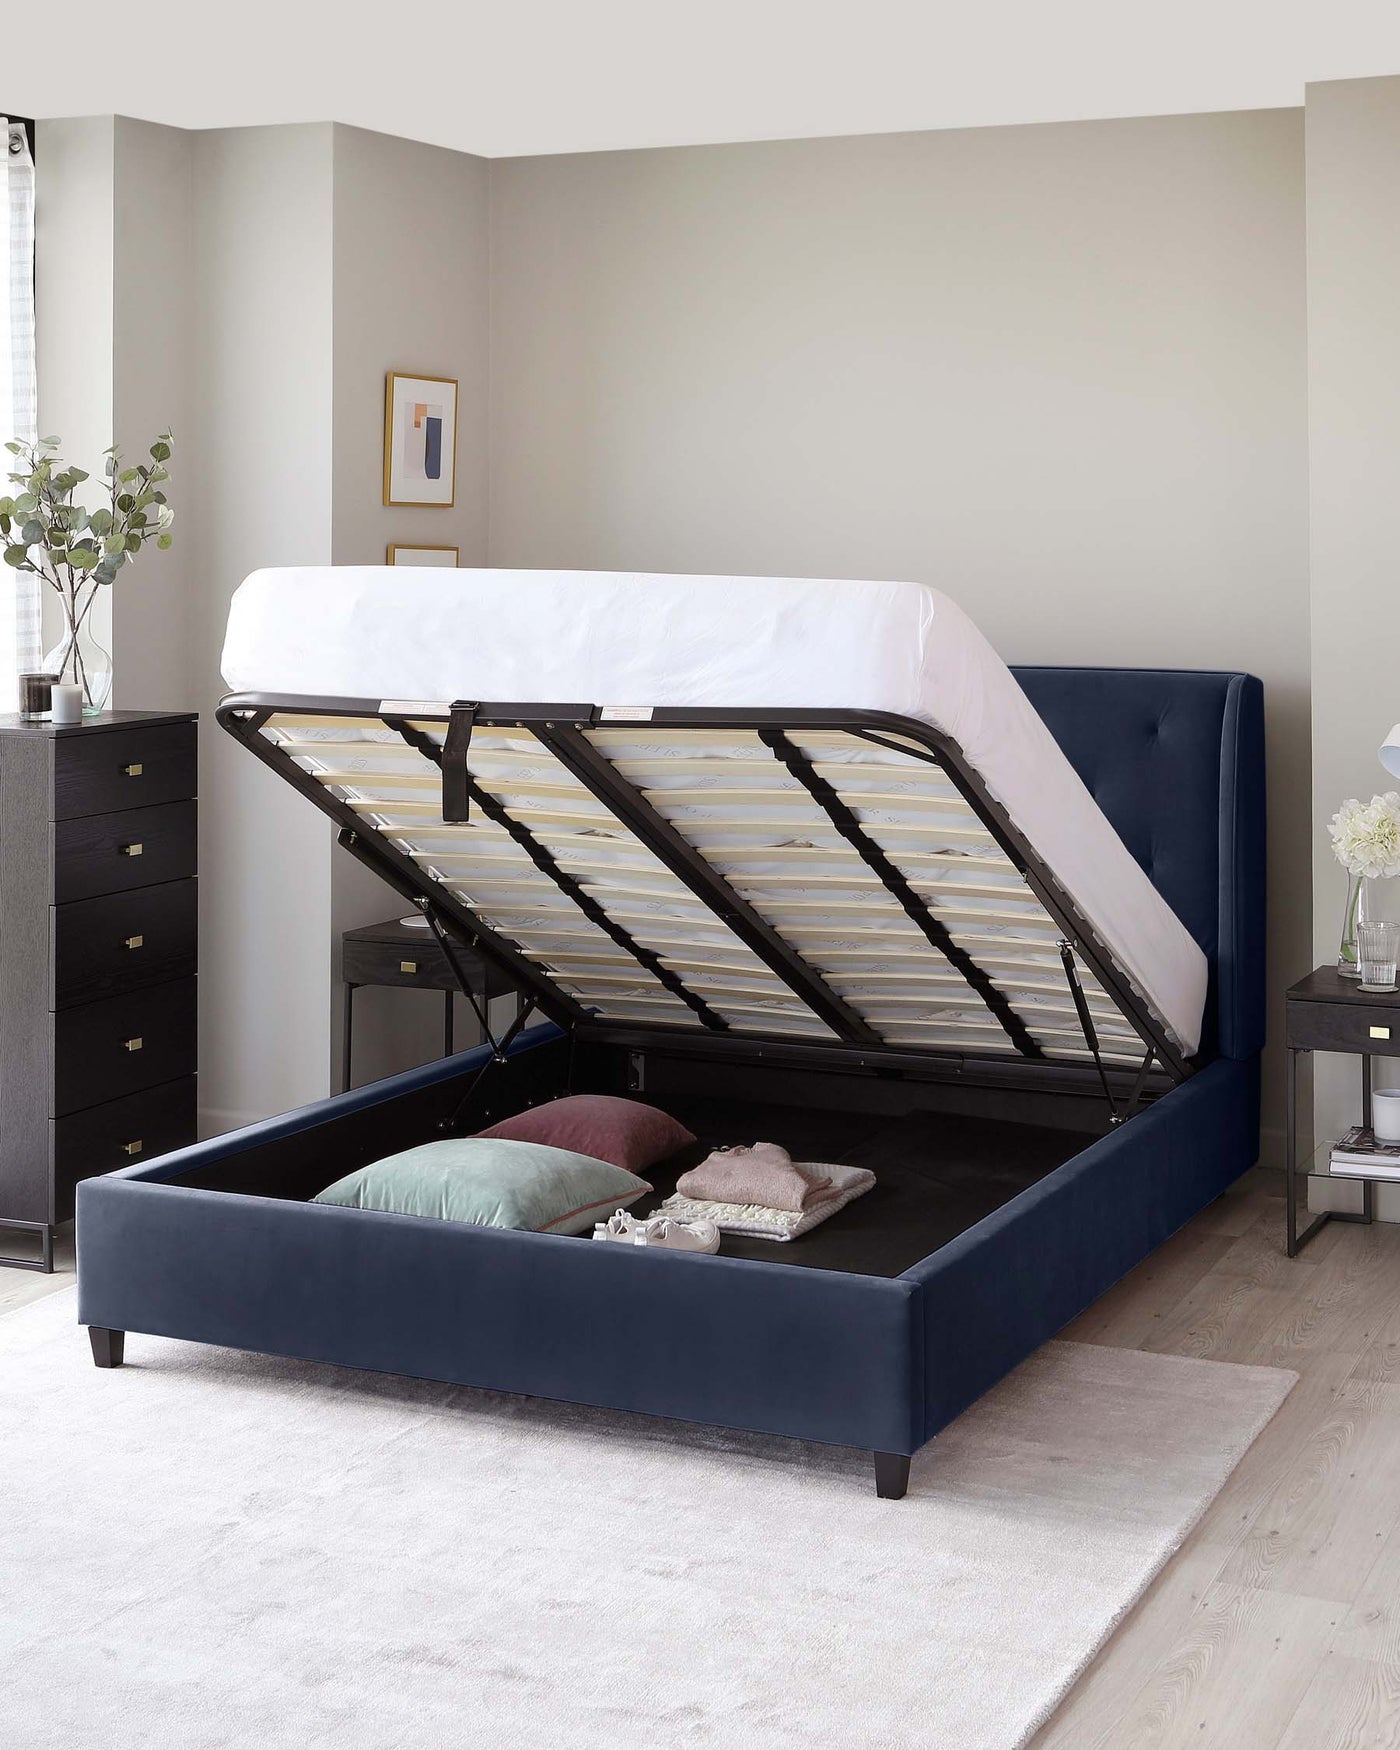 A contemporary upholstered storage bed with a lifted mattress base revealing a spacious storage compartment. The bed features a navy blue finish, a padded headboard, and a bed frame with wooden slats. To the side is a matching dark wood nightstand with drawers. The room is accessorized with a neutral-toned rug, plants, and minimalistic decor.